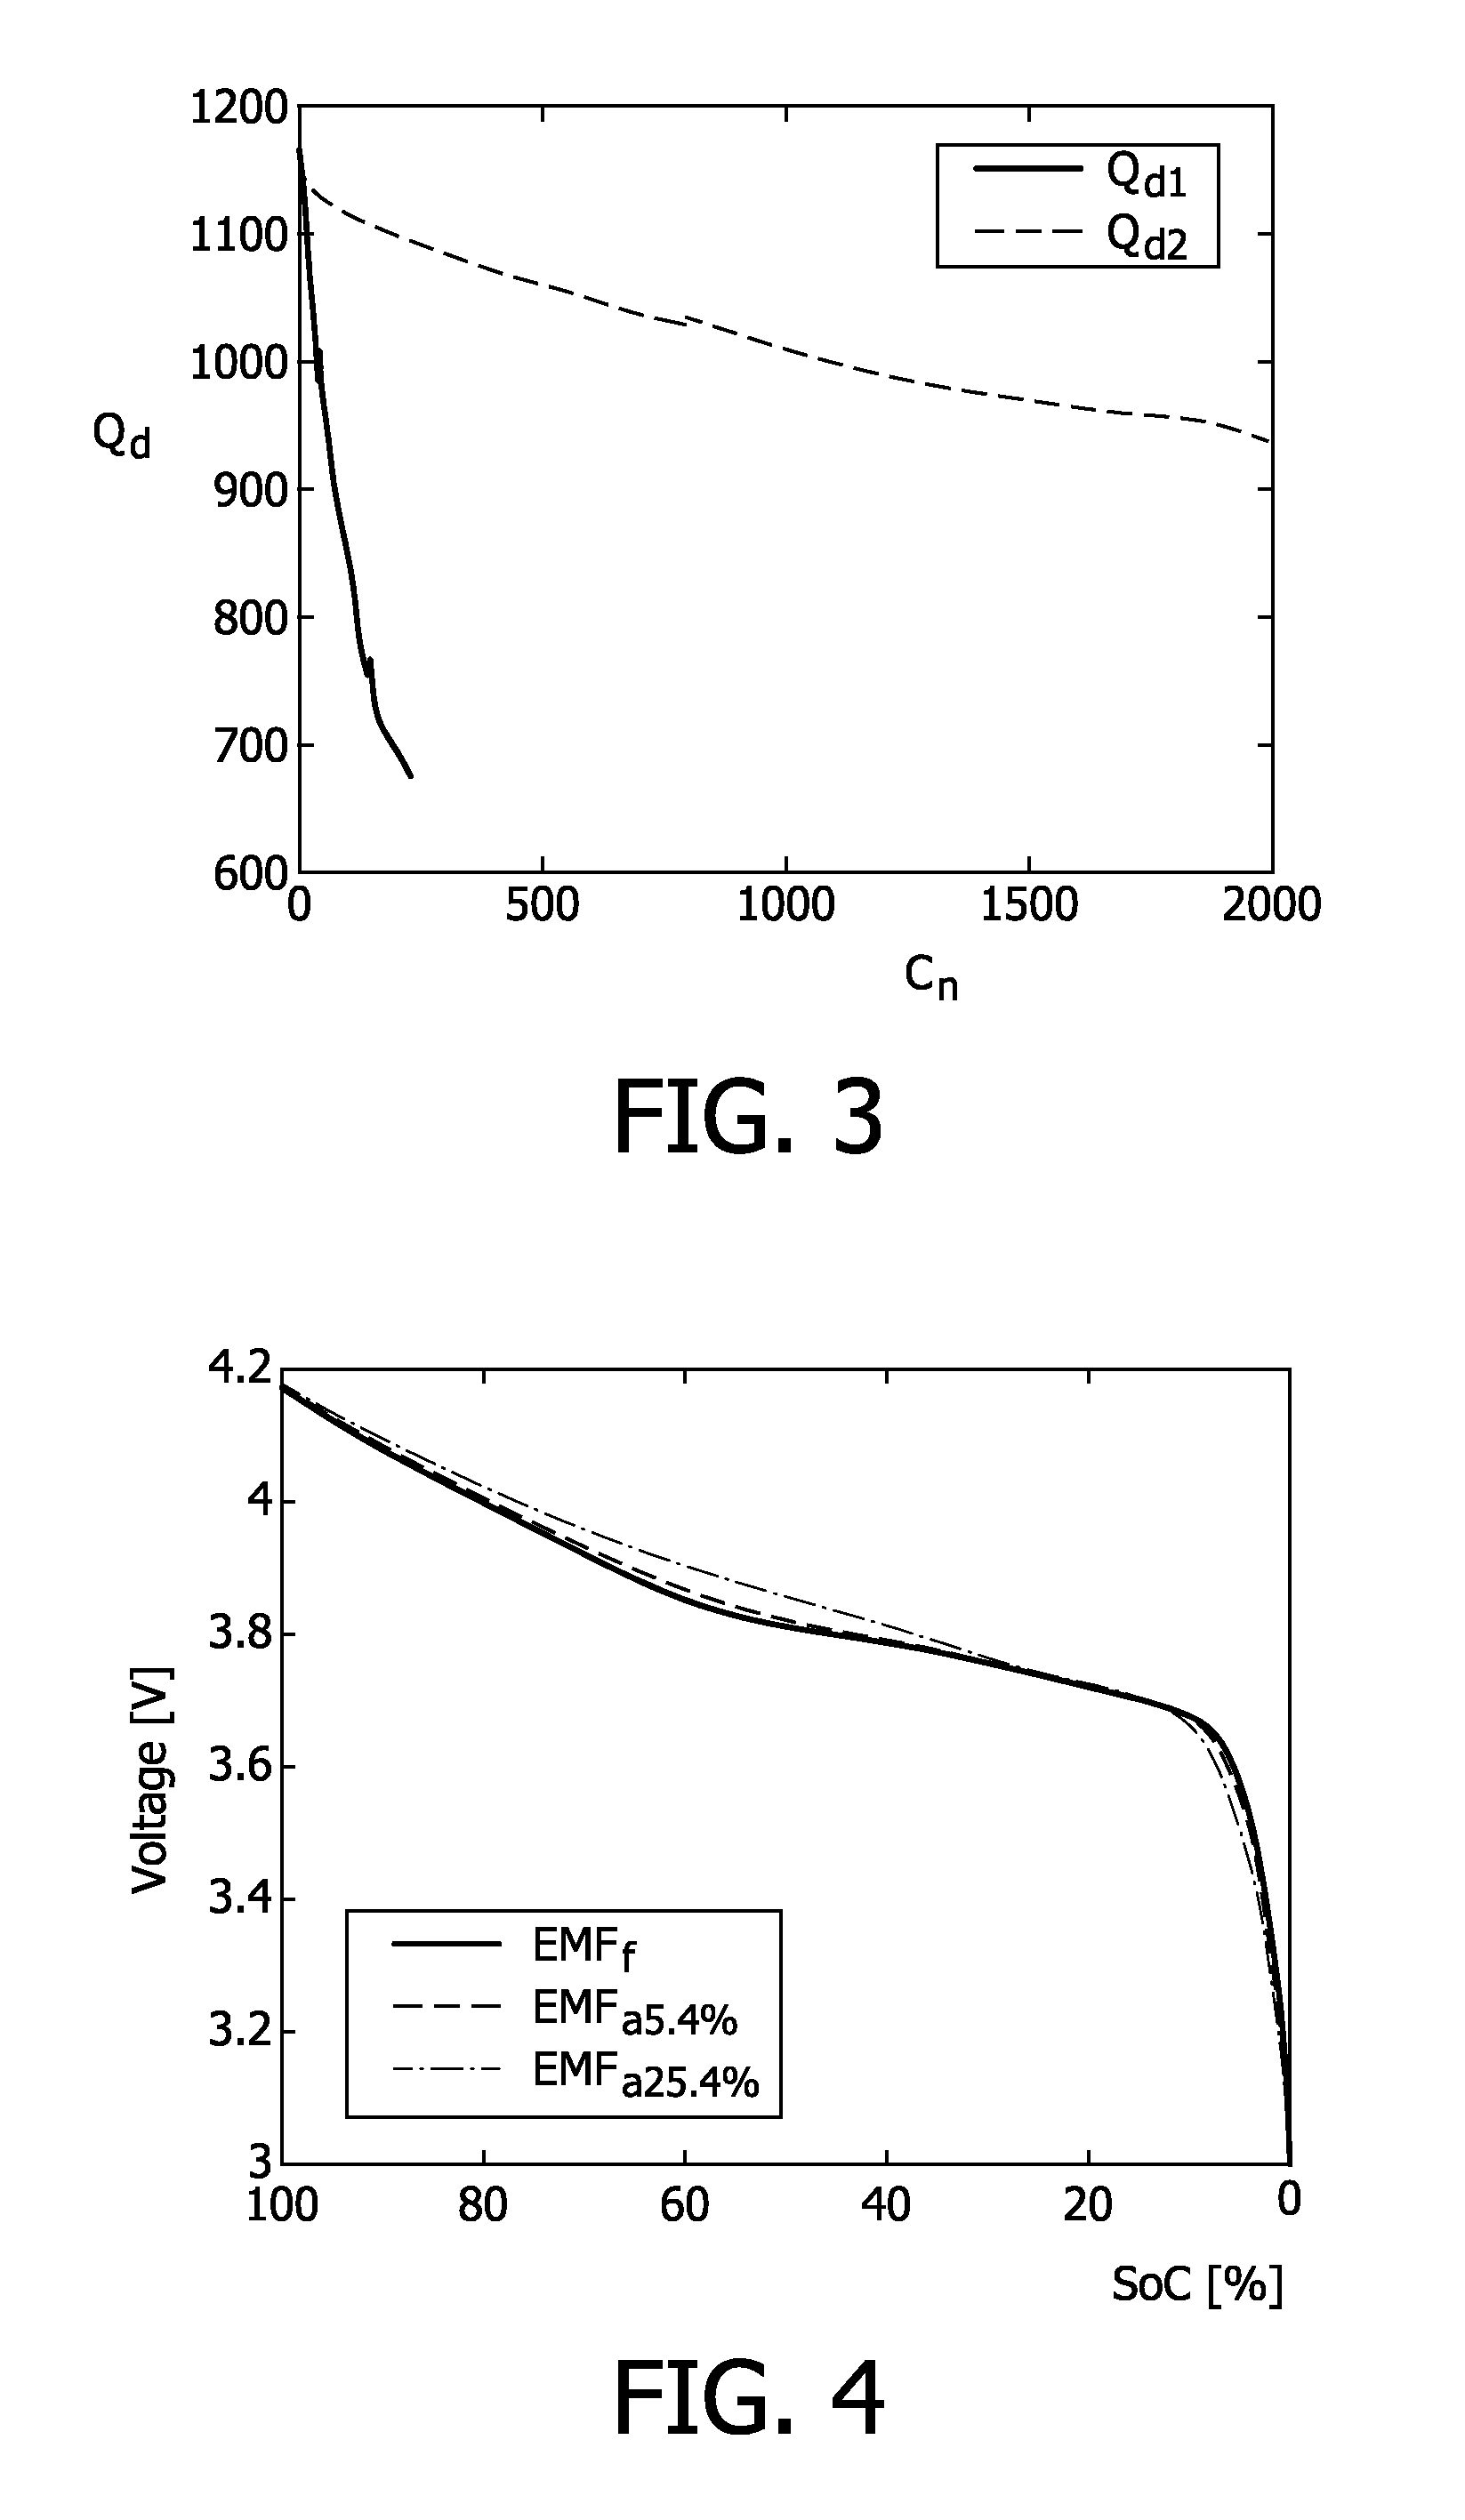 Method and apparatus for determination of the state-of-charge (SOC) of a rechargeable battery